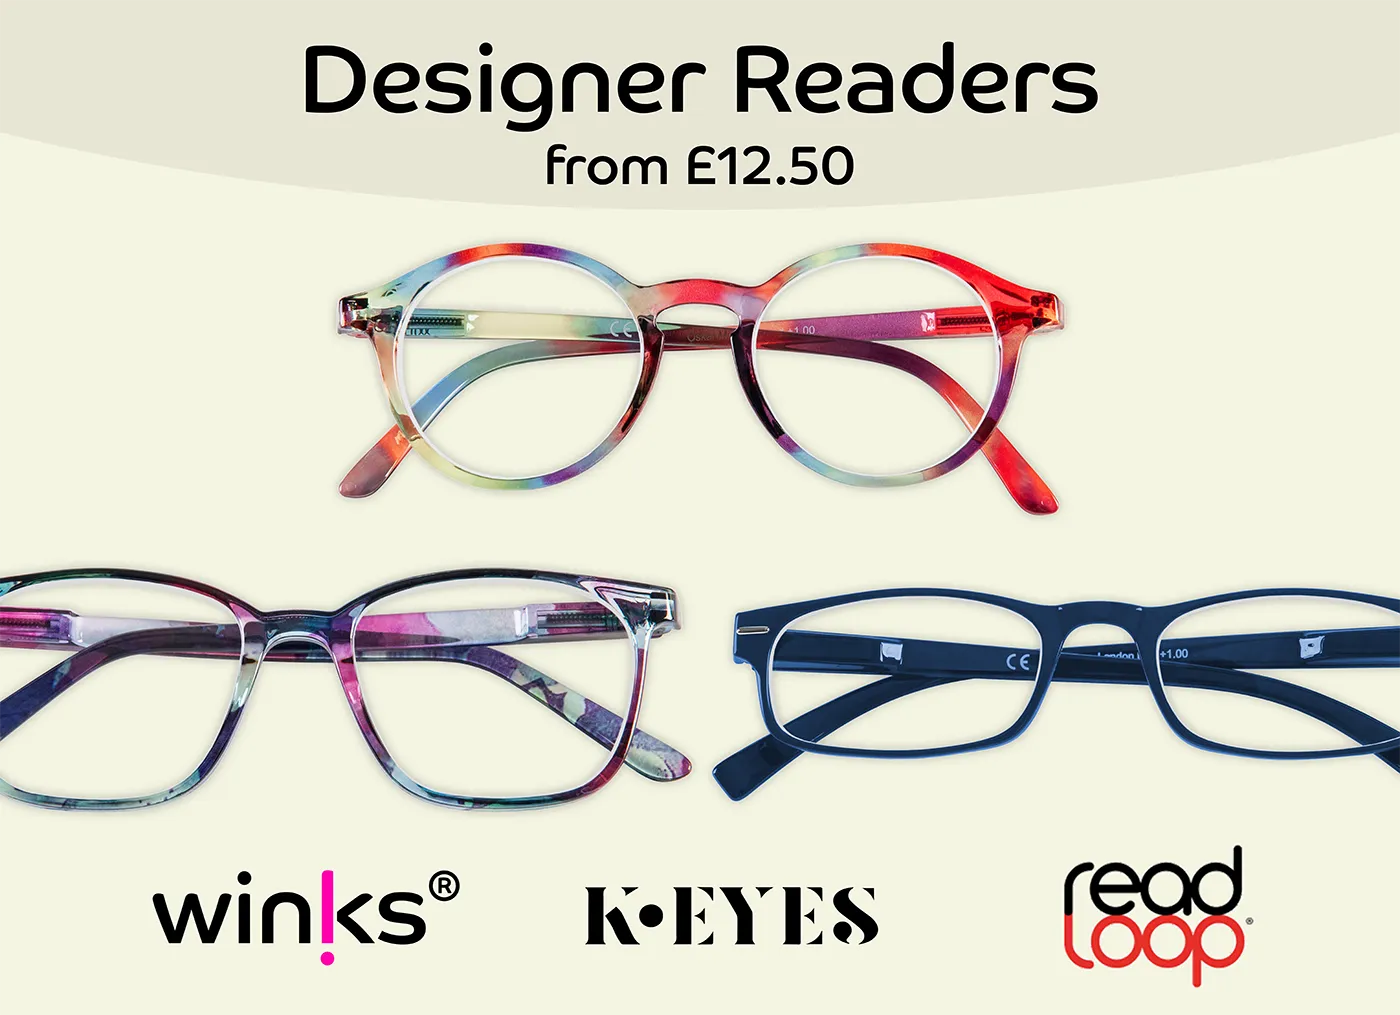 Designer reading glasses from popular brands including Winks, K-Eyes and Read Loop, starting from only £12.50.